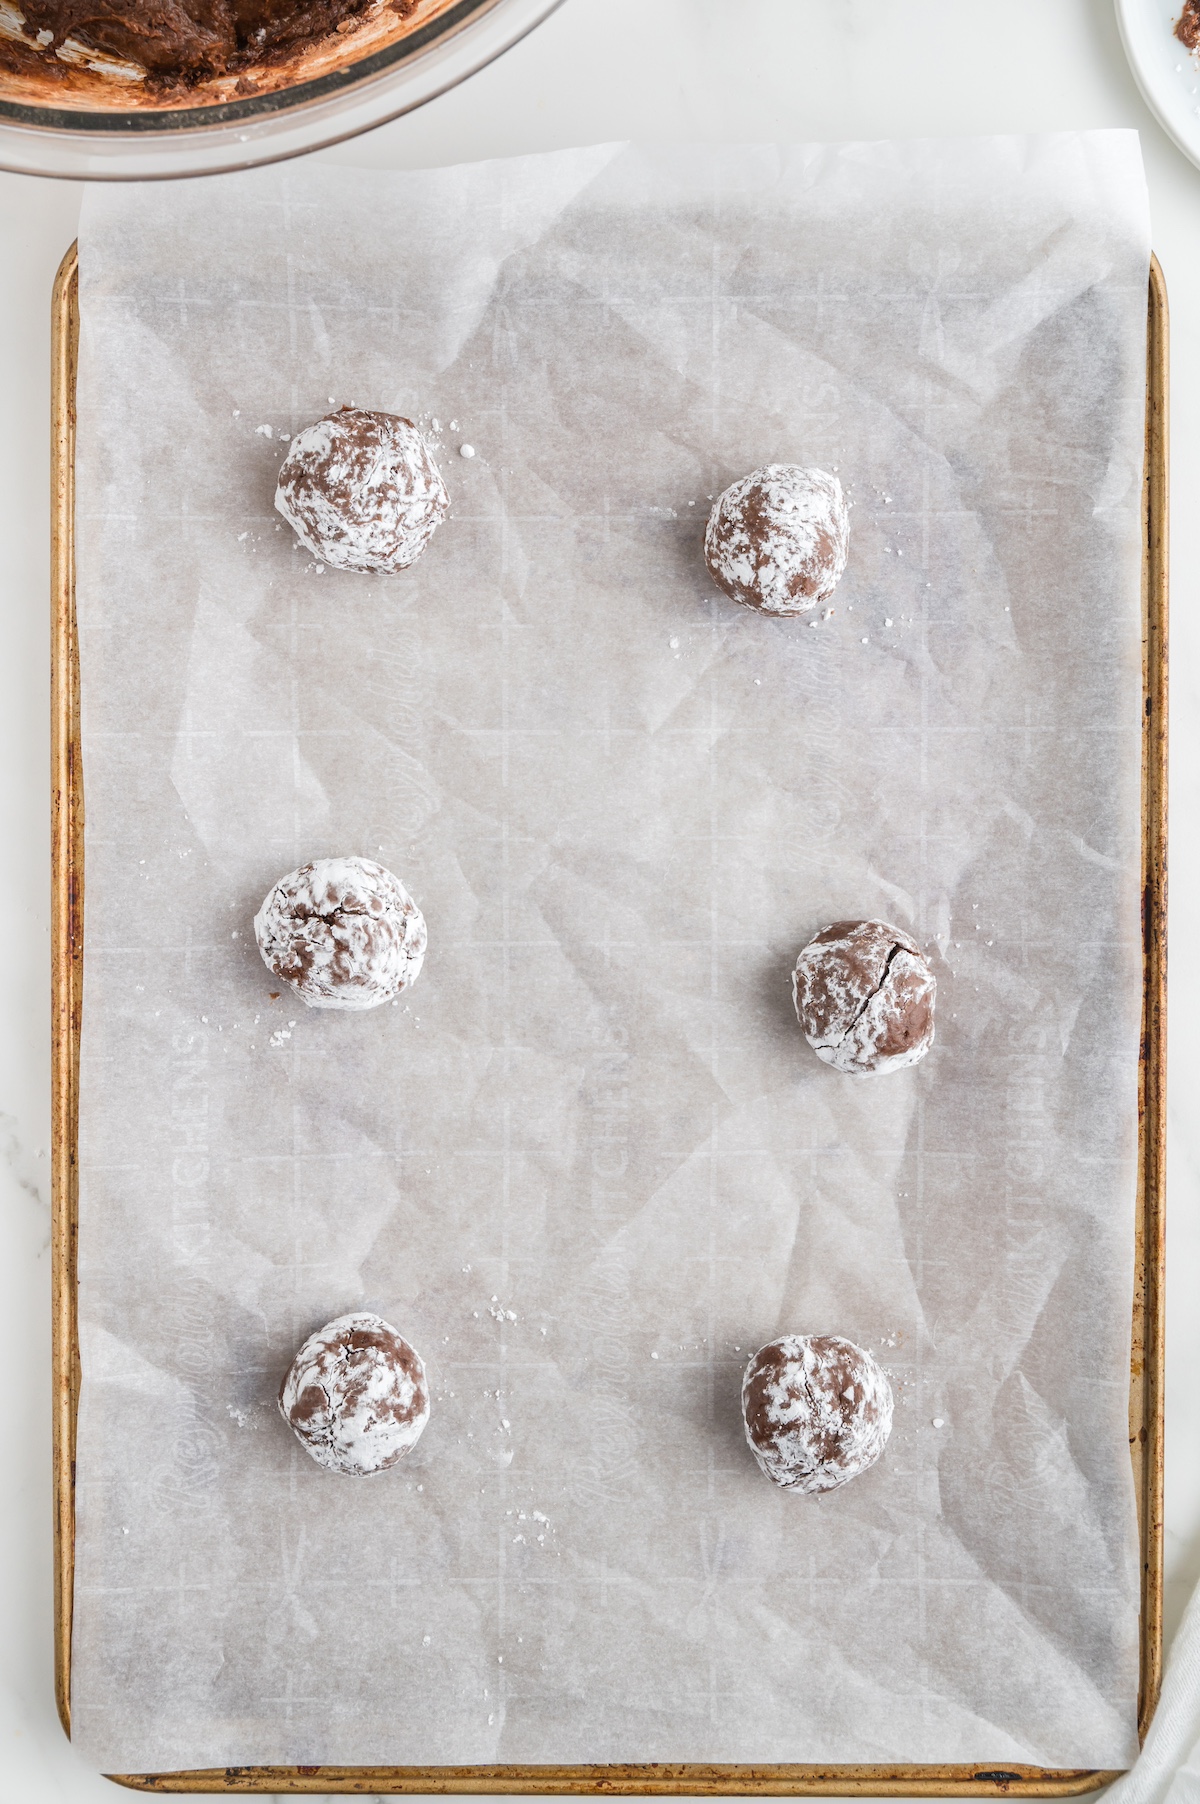 rolled chocolate dough balls placed on a baking sheet covered in parchment paper